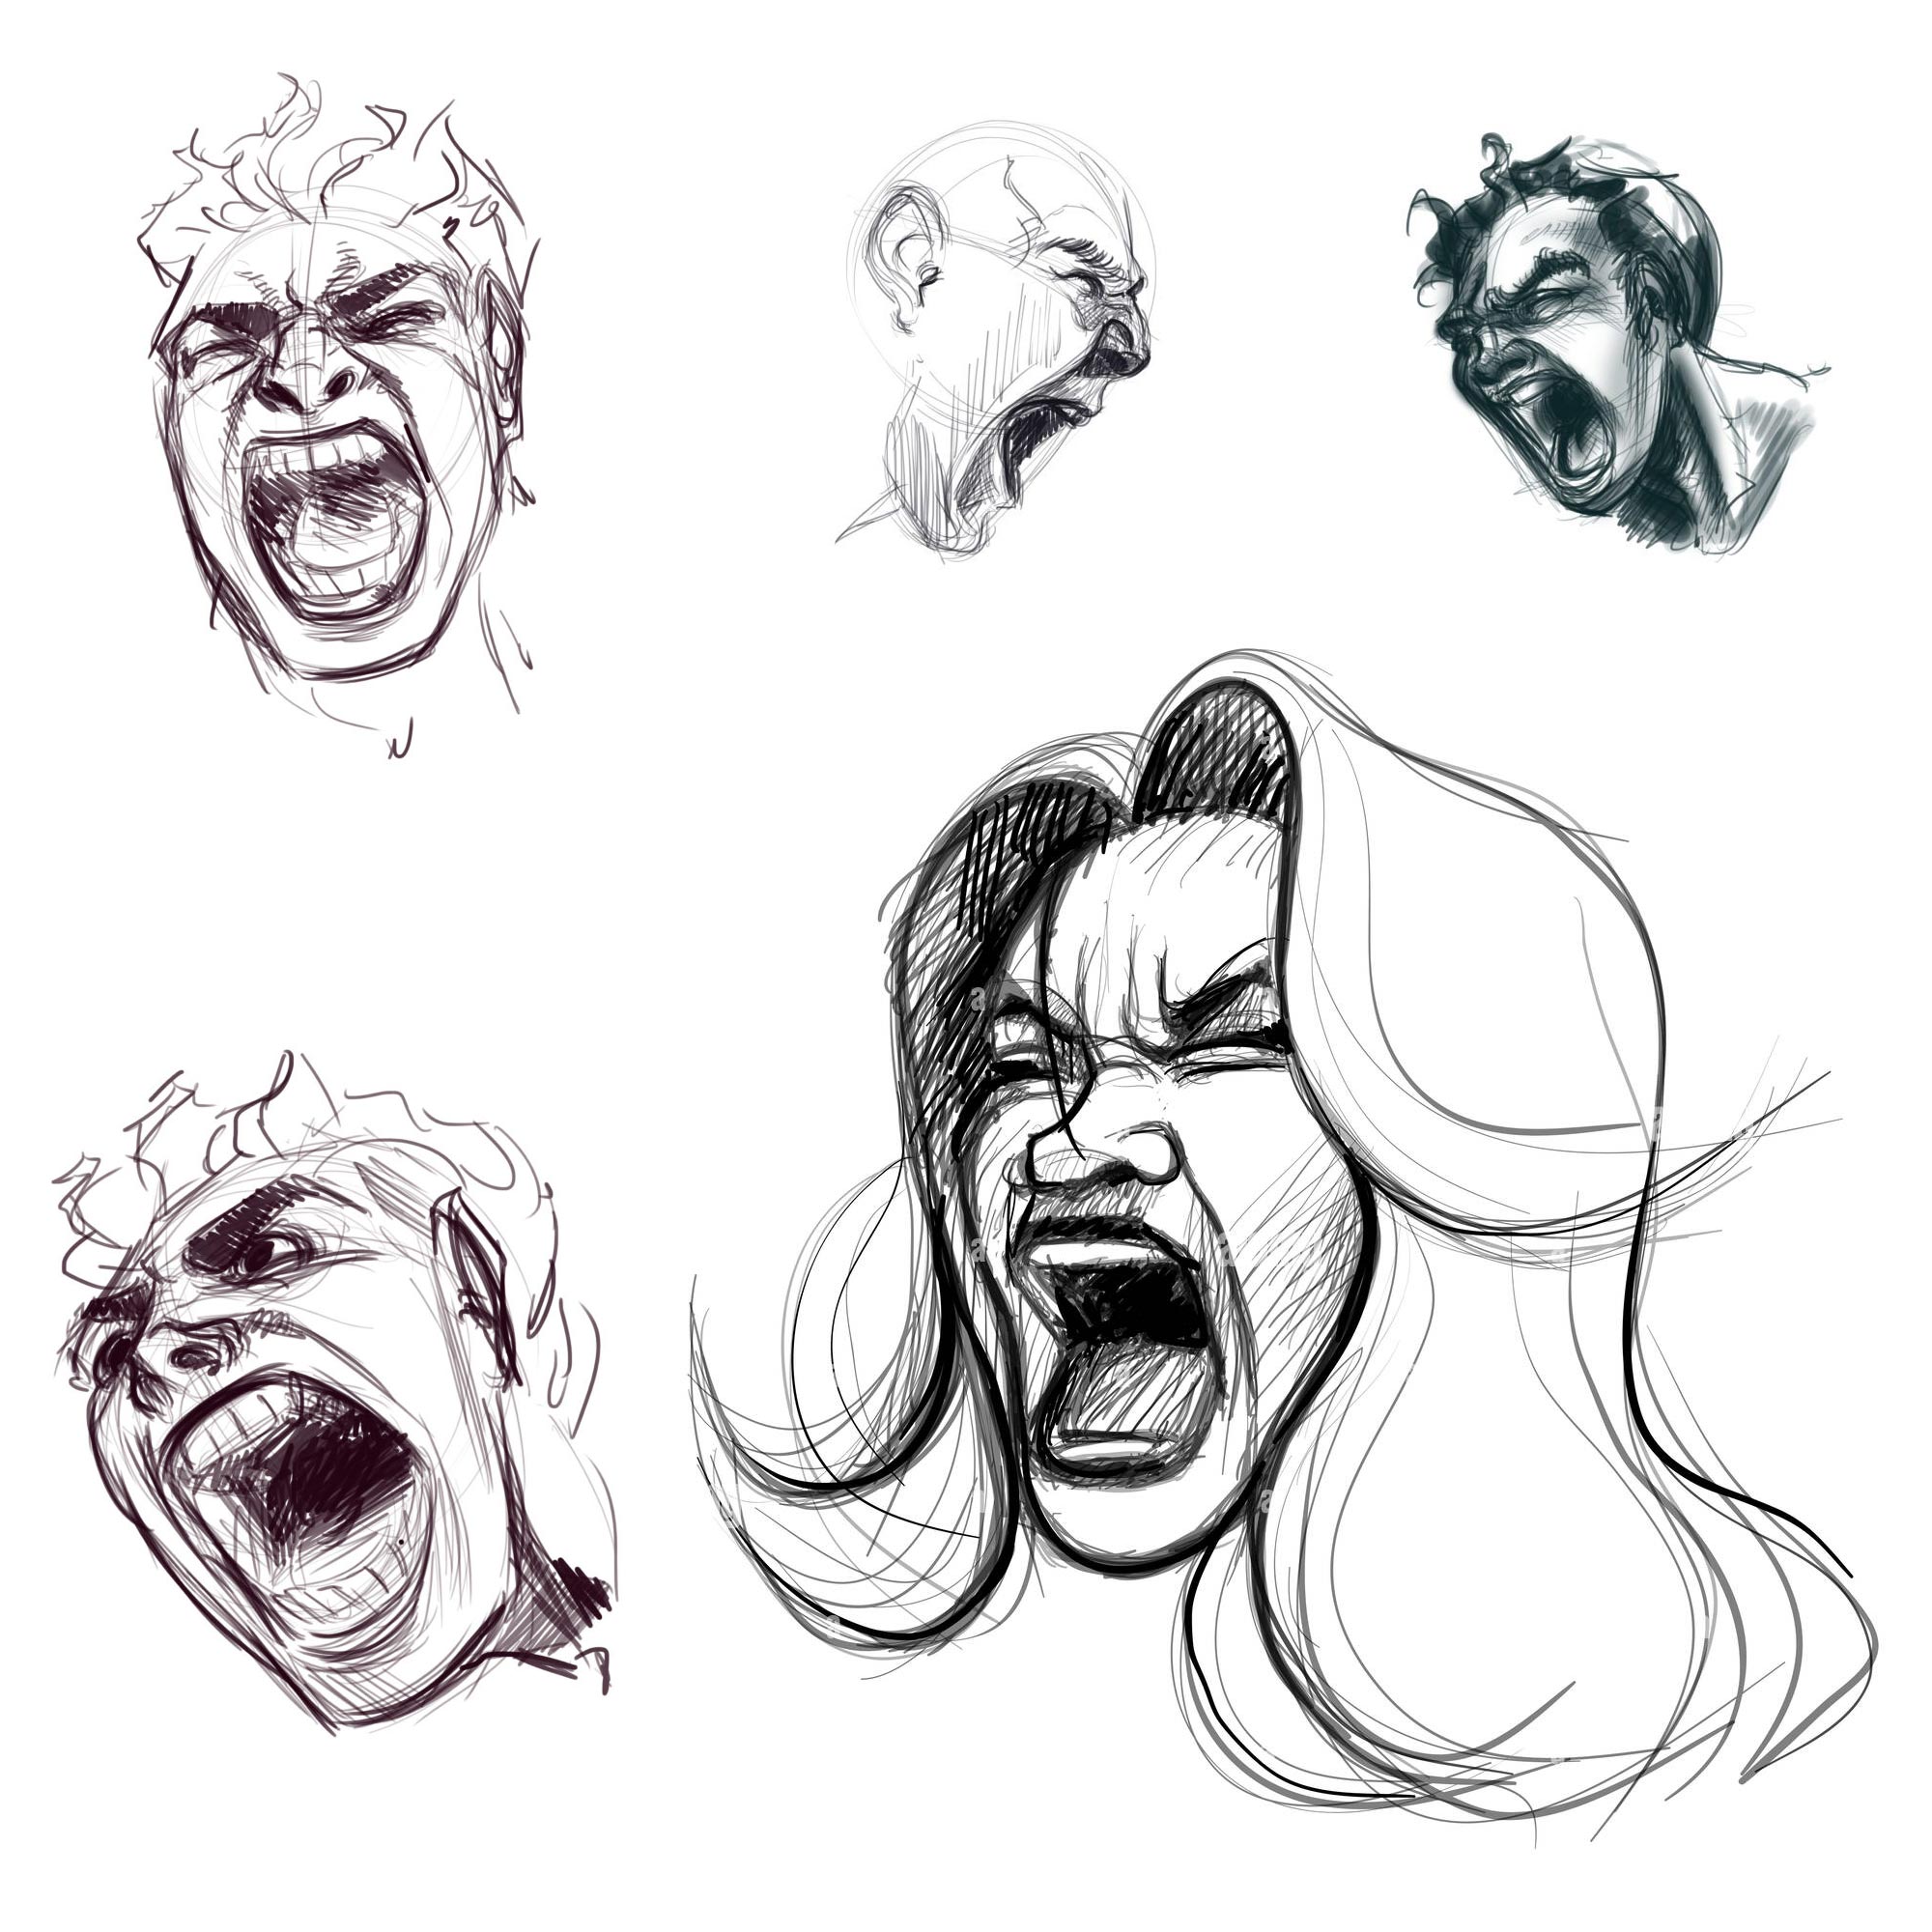 Screaming Drawing Reference and Sketches for Artists